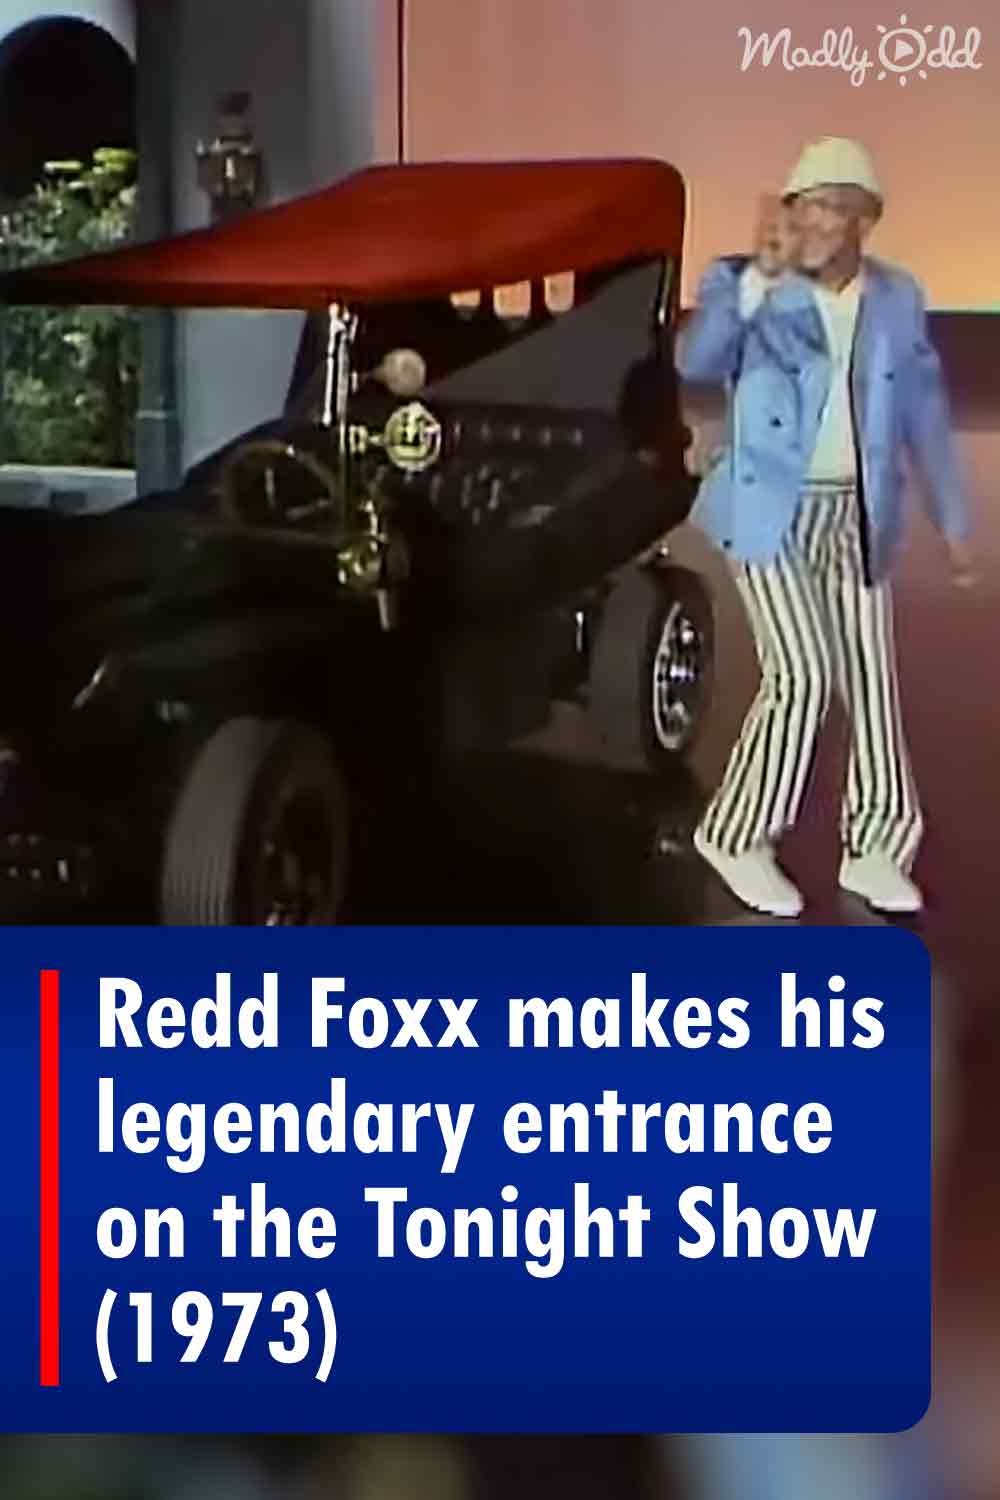 Redd Foxx makes his legendary entrance on the Tonight Show (1973)